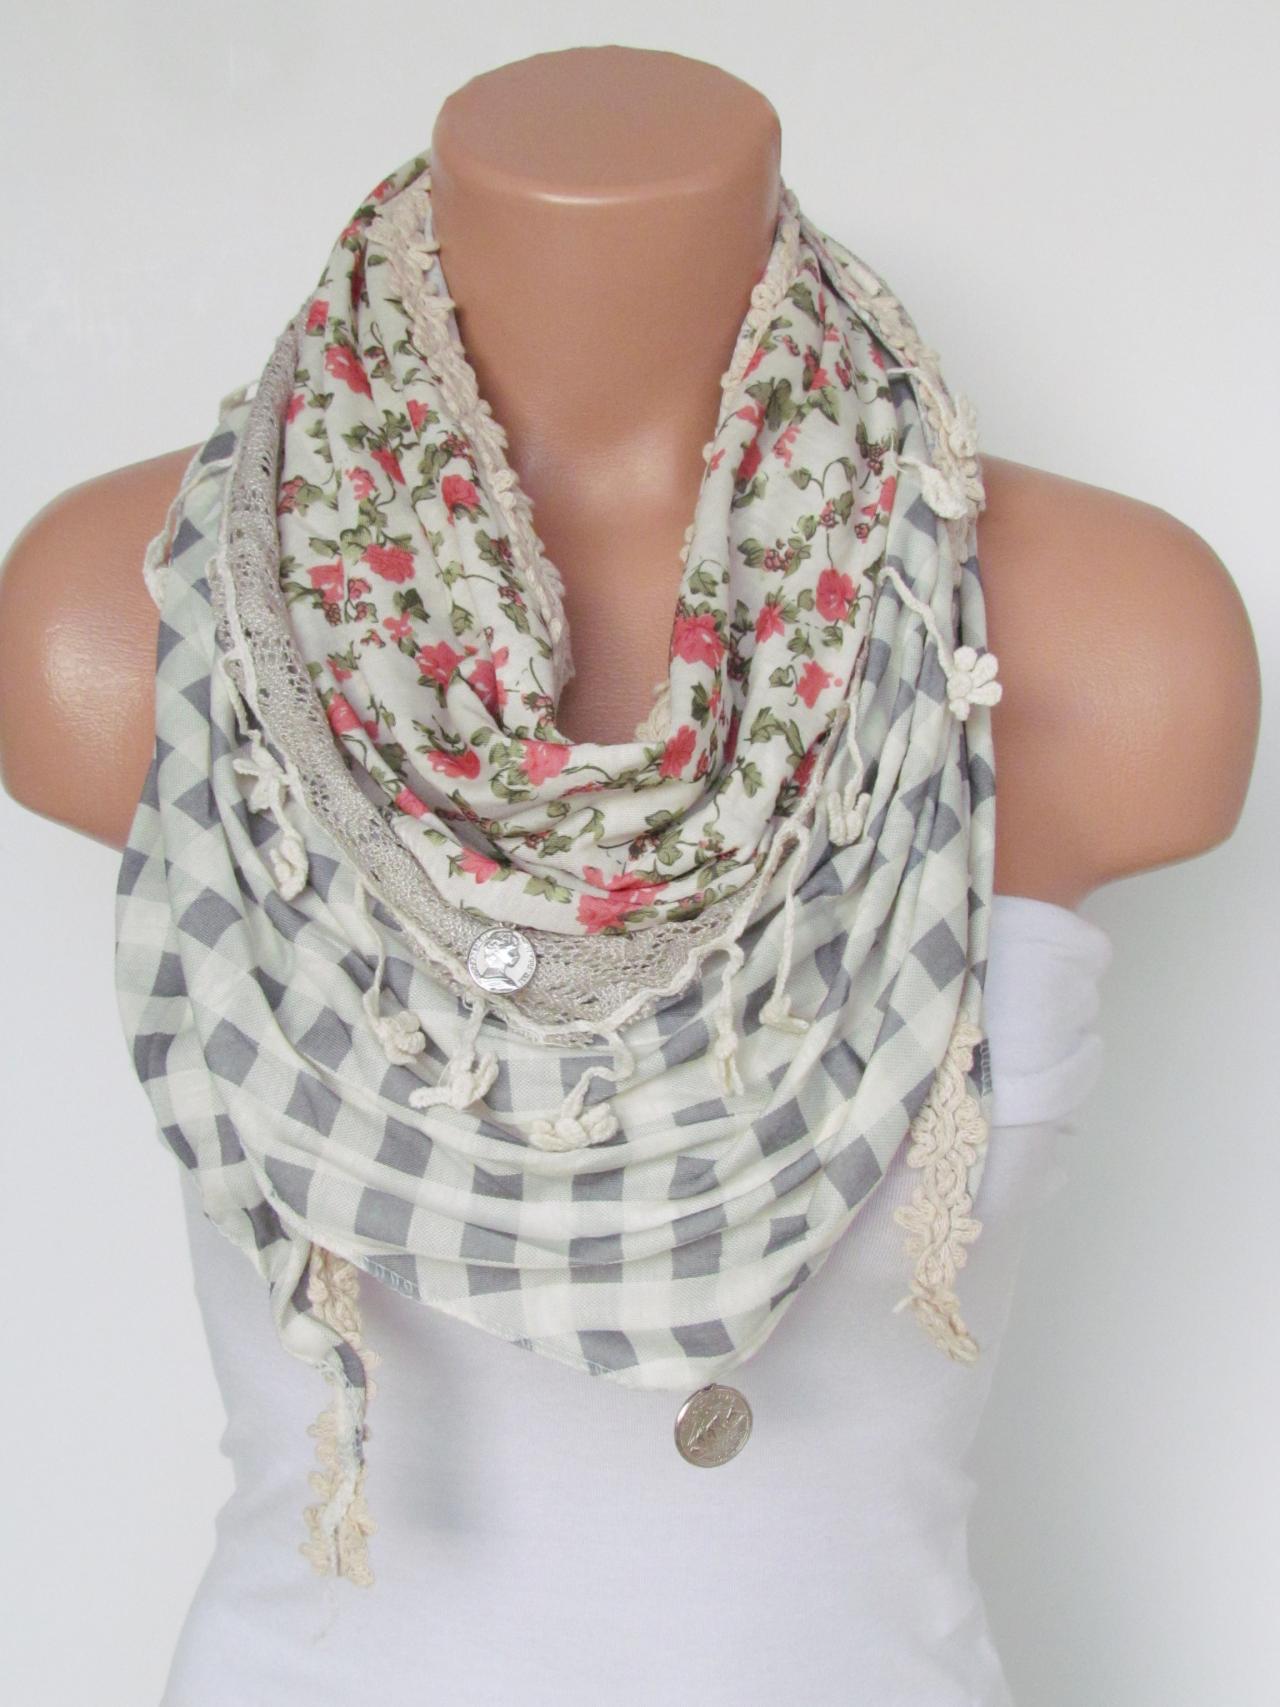 Winter Scarf with fringe and lace-Triangle Shawl Scarf-Winter Fashion-Lace Scarf-Necklace-Pashmina Scarf- Stone Pale Green Infinity Scarf